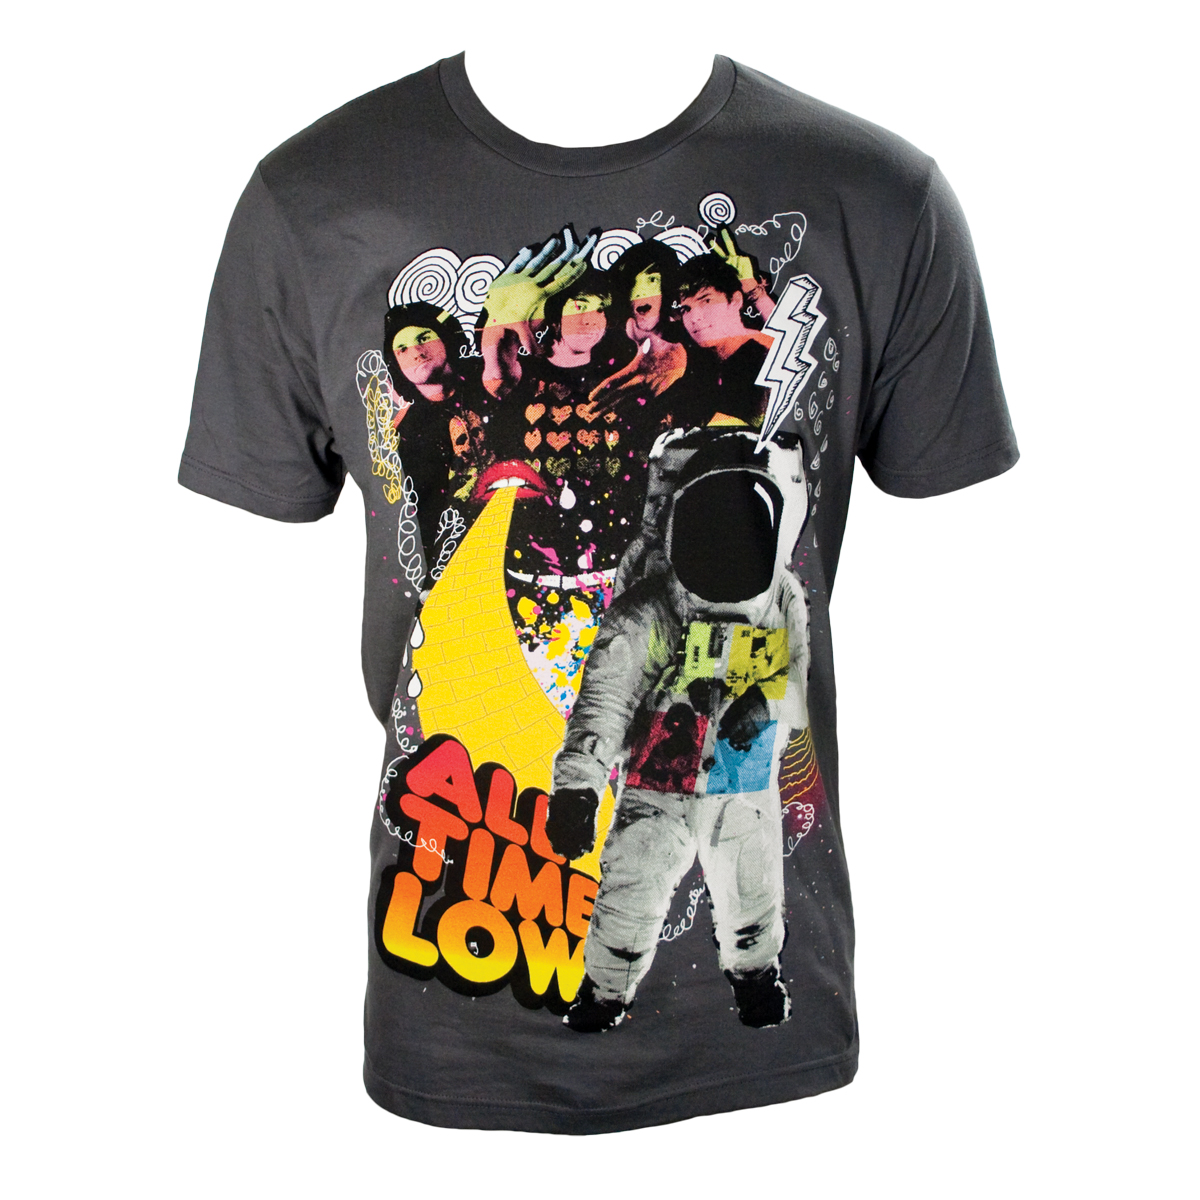 ALL TIME LOW - Space Case - Slim Fit Charcoal